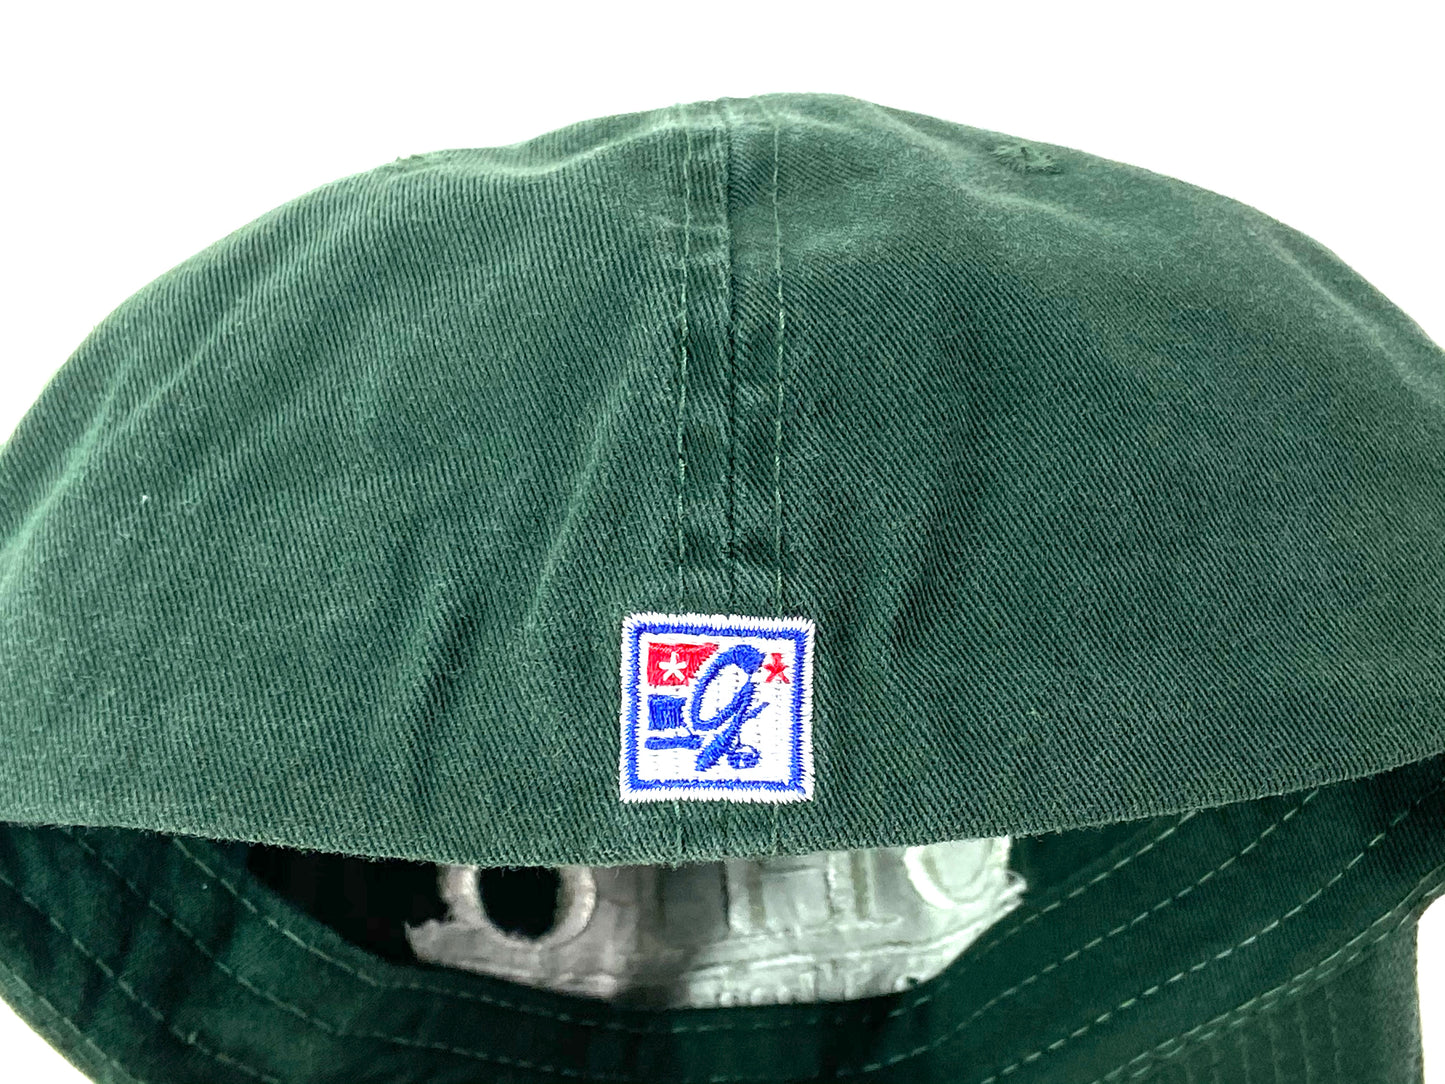 Ohio University Bobcats Vintage NCAA Fitted Unstructured Hat by The Game